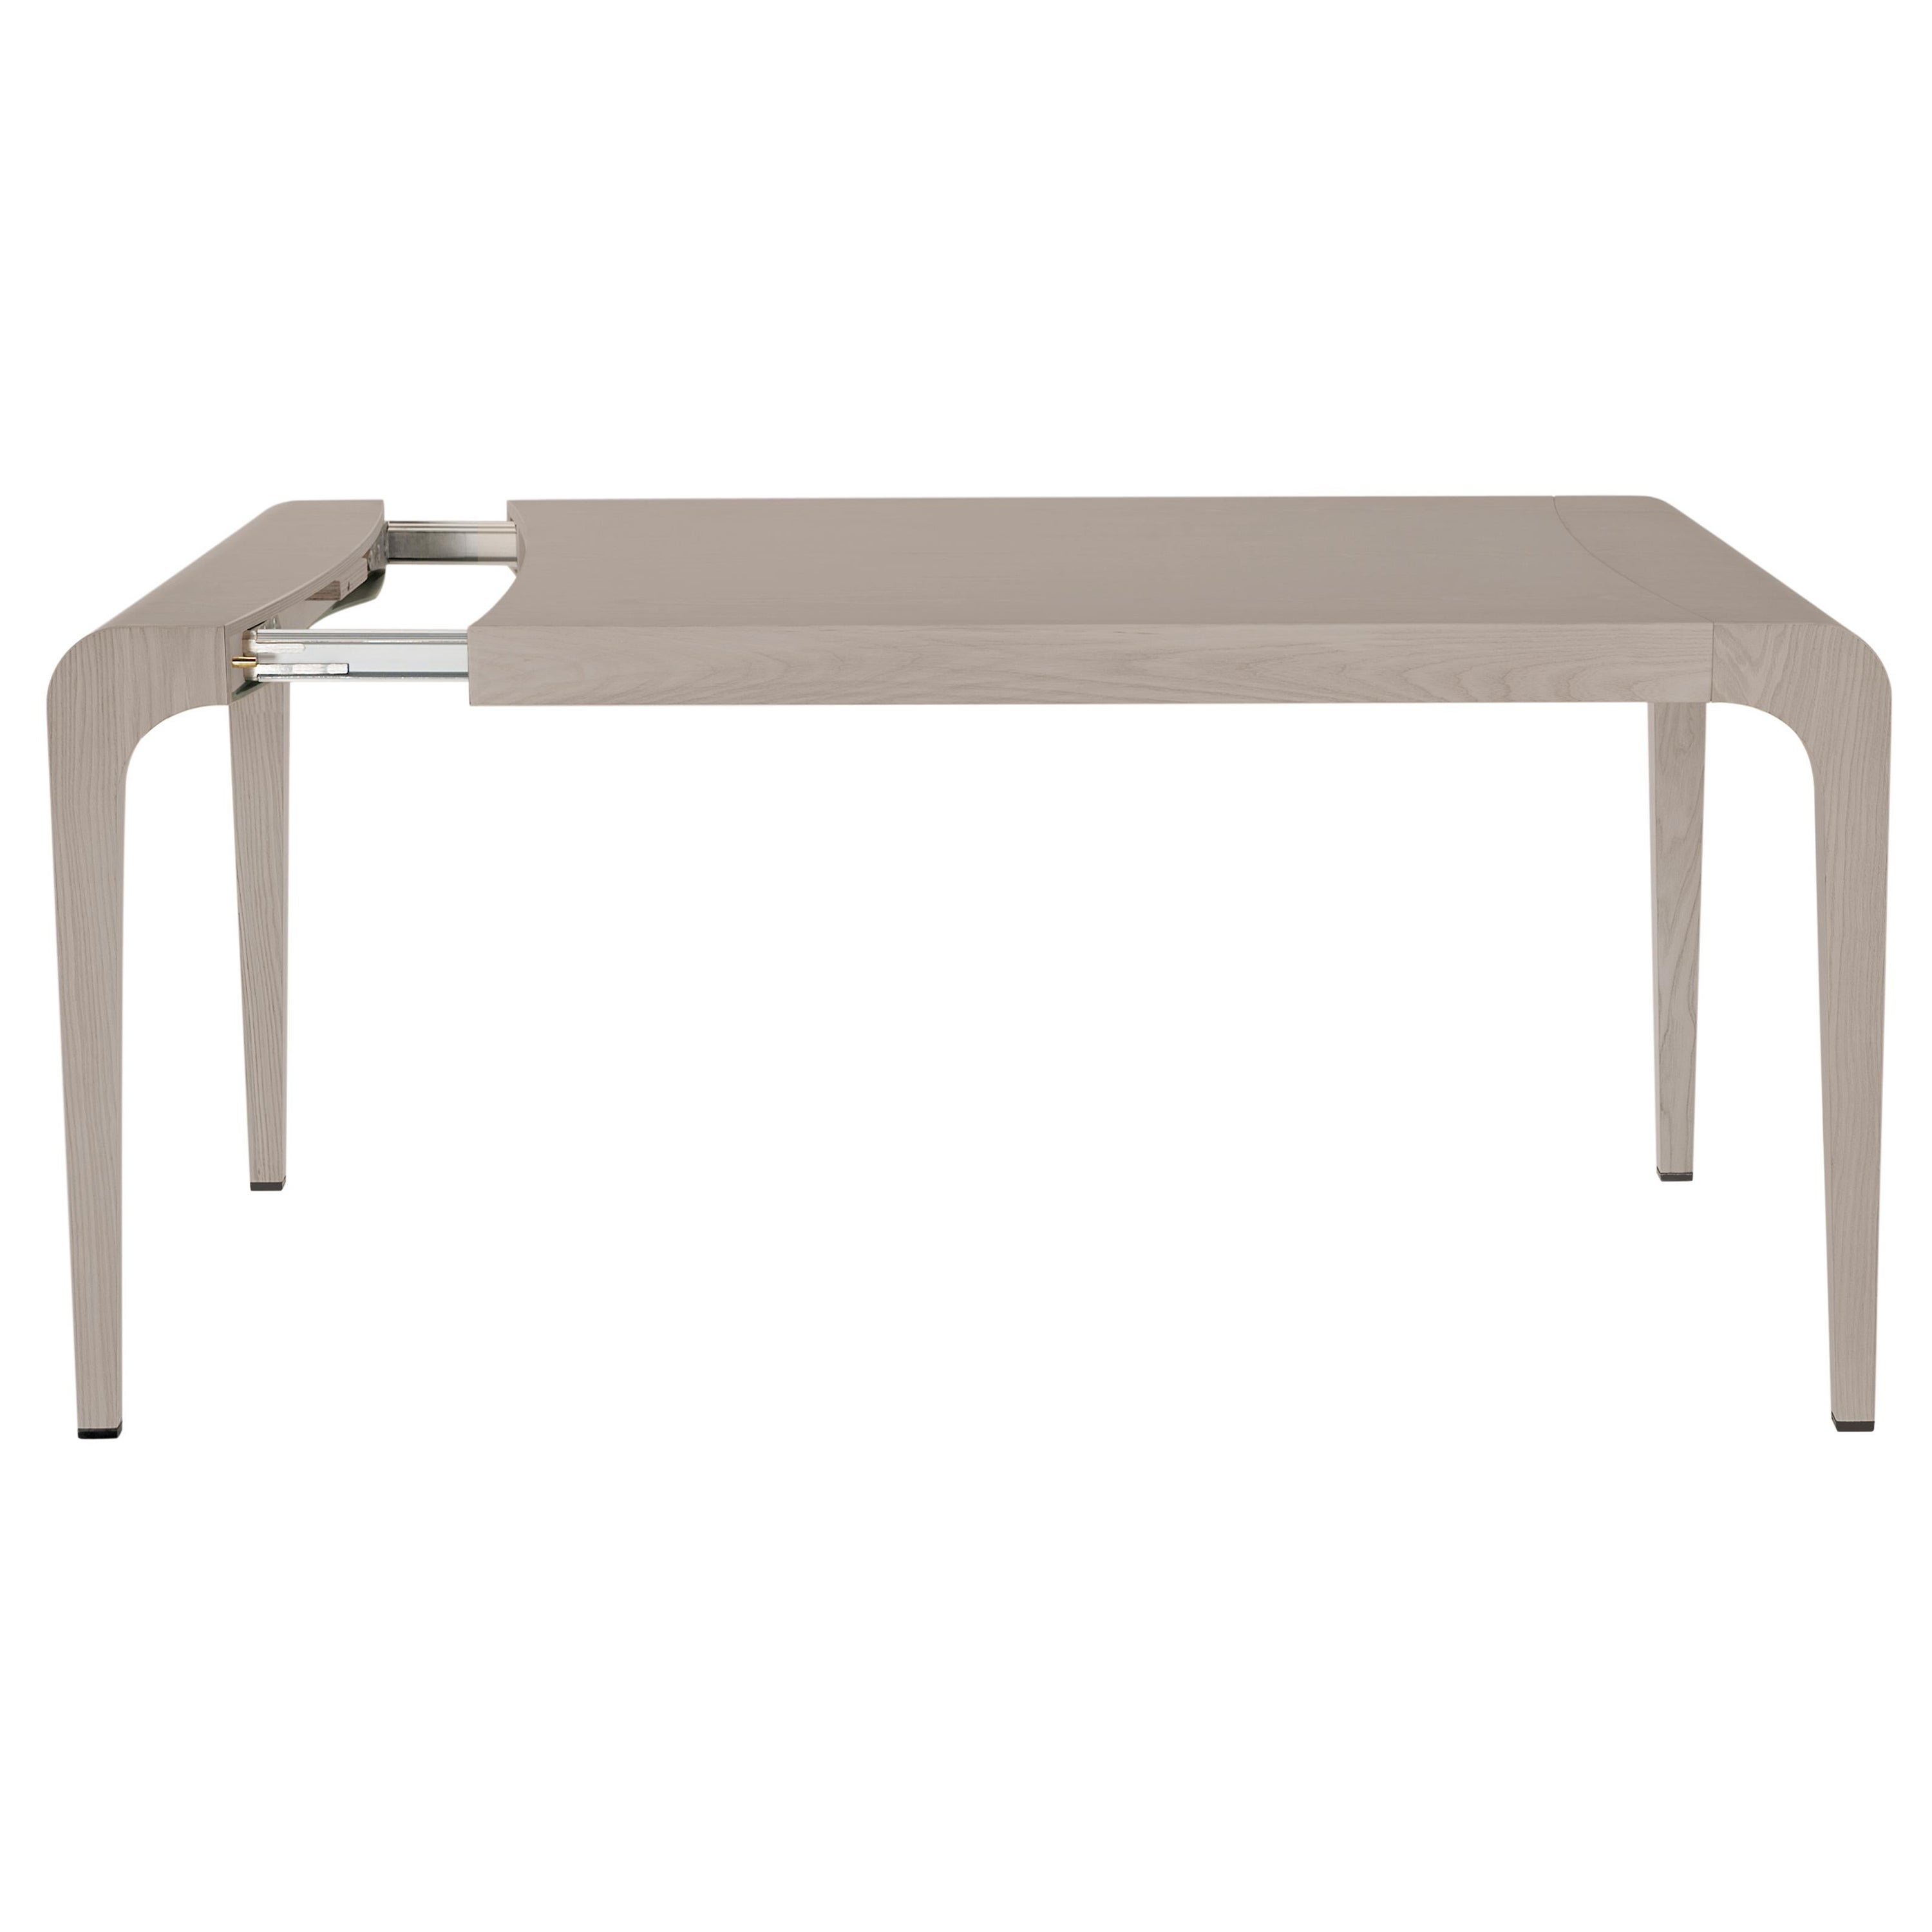 Alias Large 396 Ilvolo Extendable Table in Sand Color Stained Wood Top and Frame For Sale